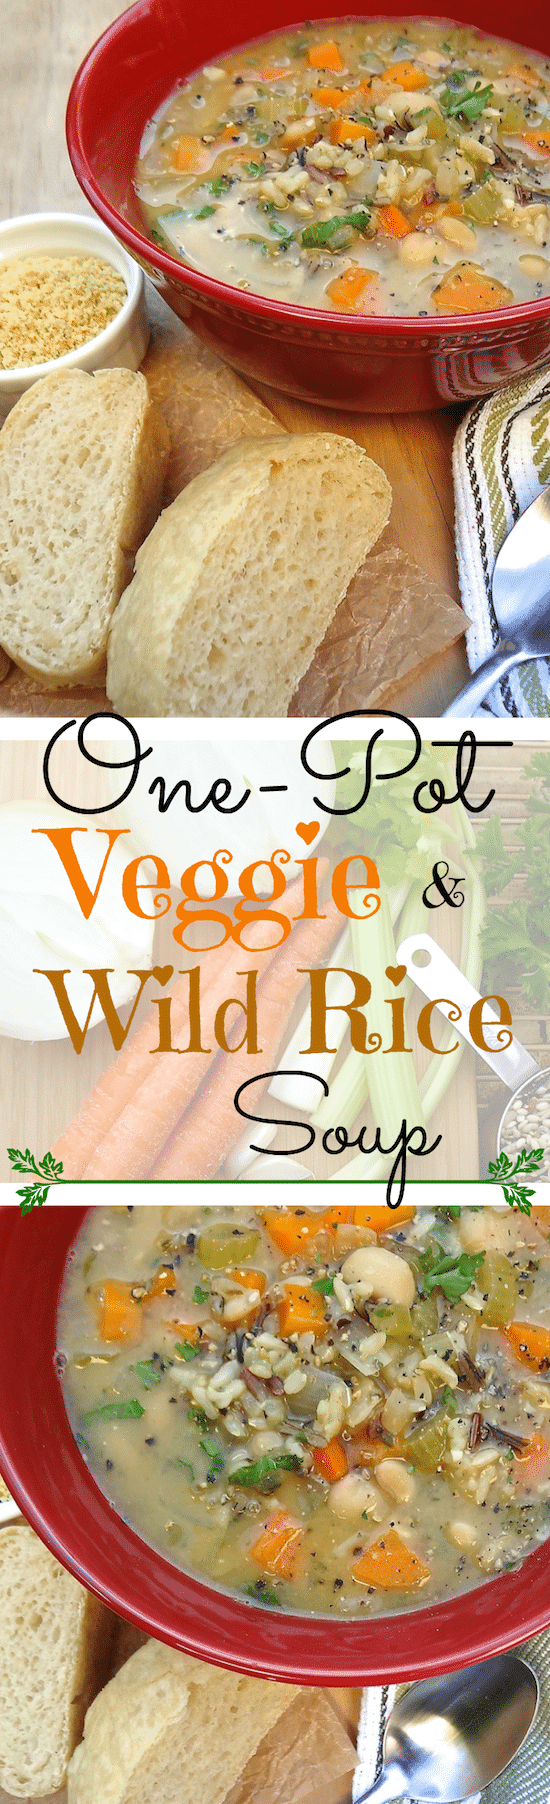 Quick One-Pot Veggie and Wild Rice Soup - vegan. A hearty and delicious soup perfect for those cold winter days. It only takes one pot, a few simple ingredients and about 30 minutes to cook. Vegan and Gluten-Free!